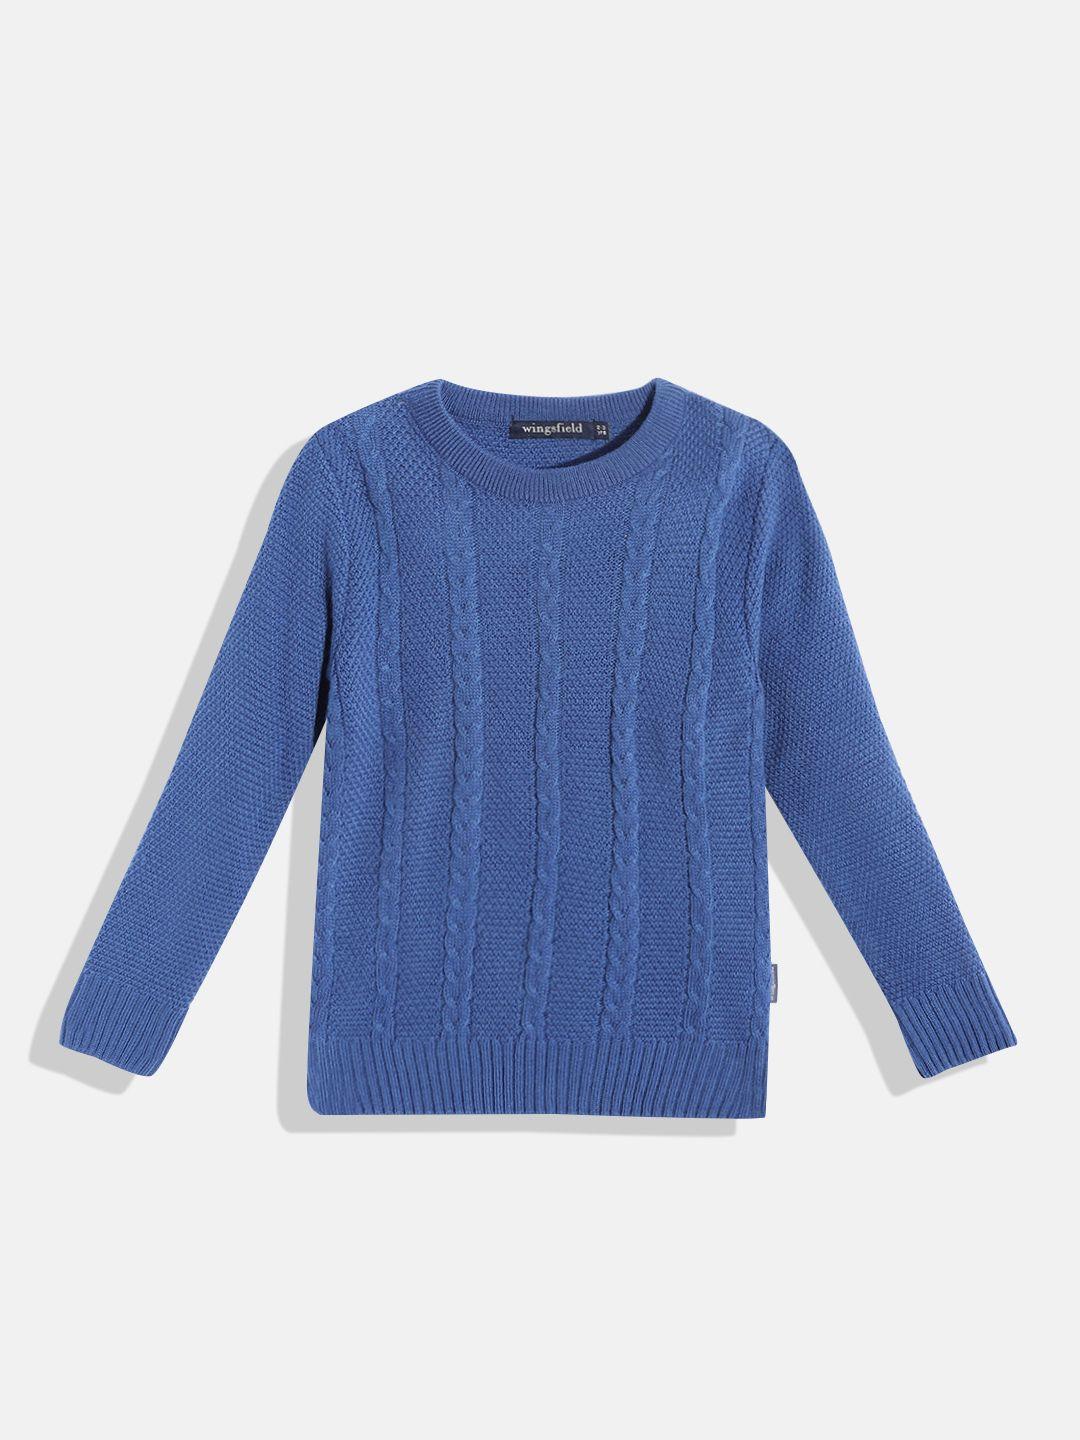 wingsfield boys blue cable knit pullover